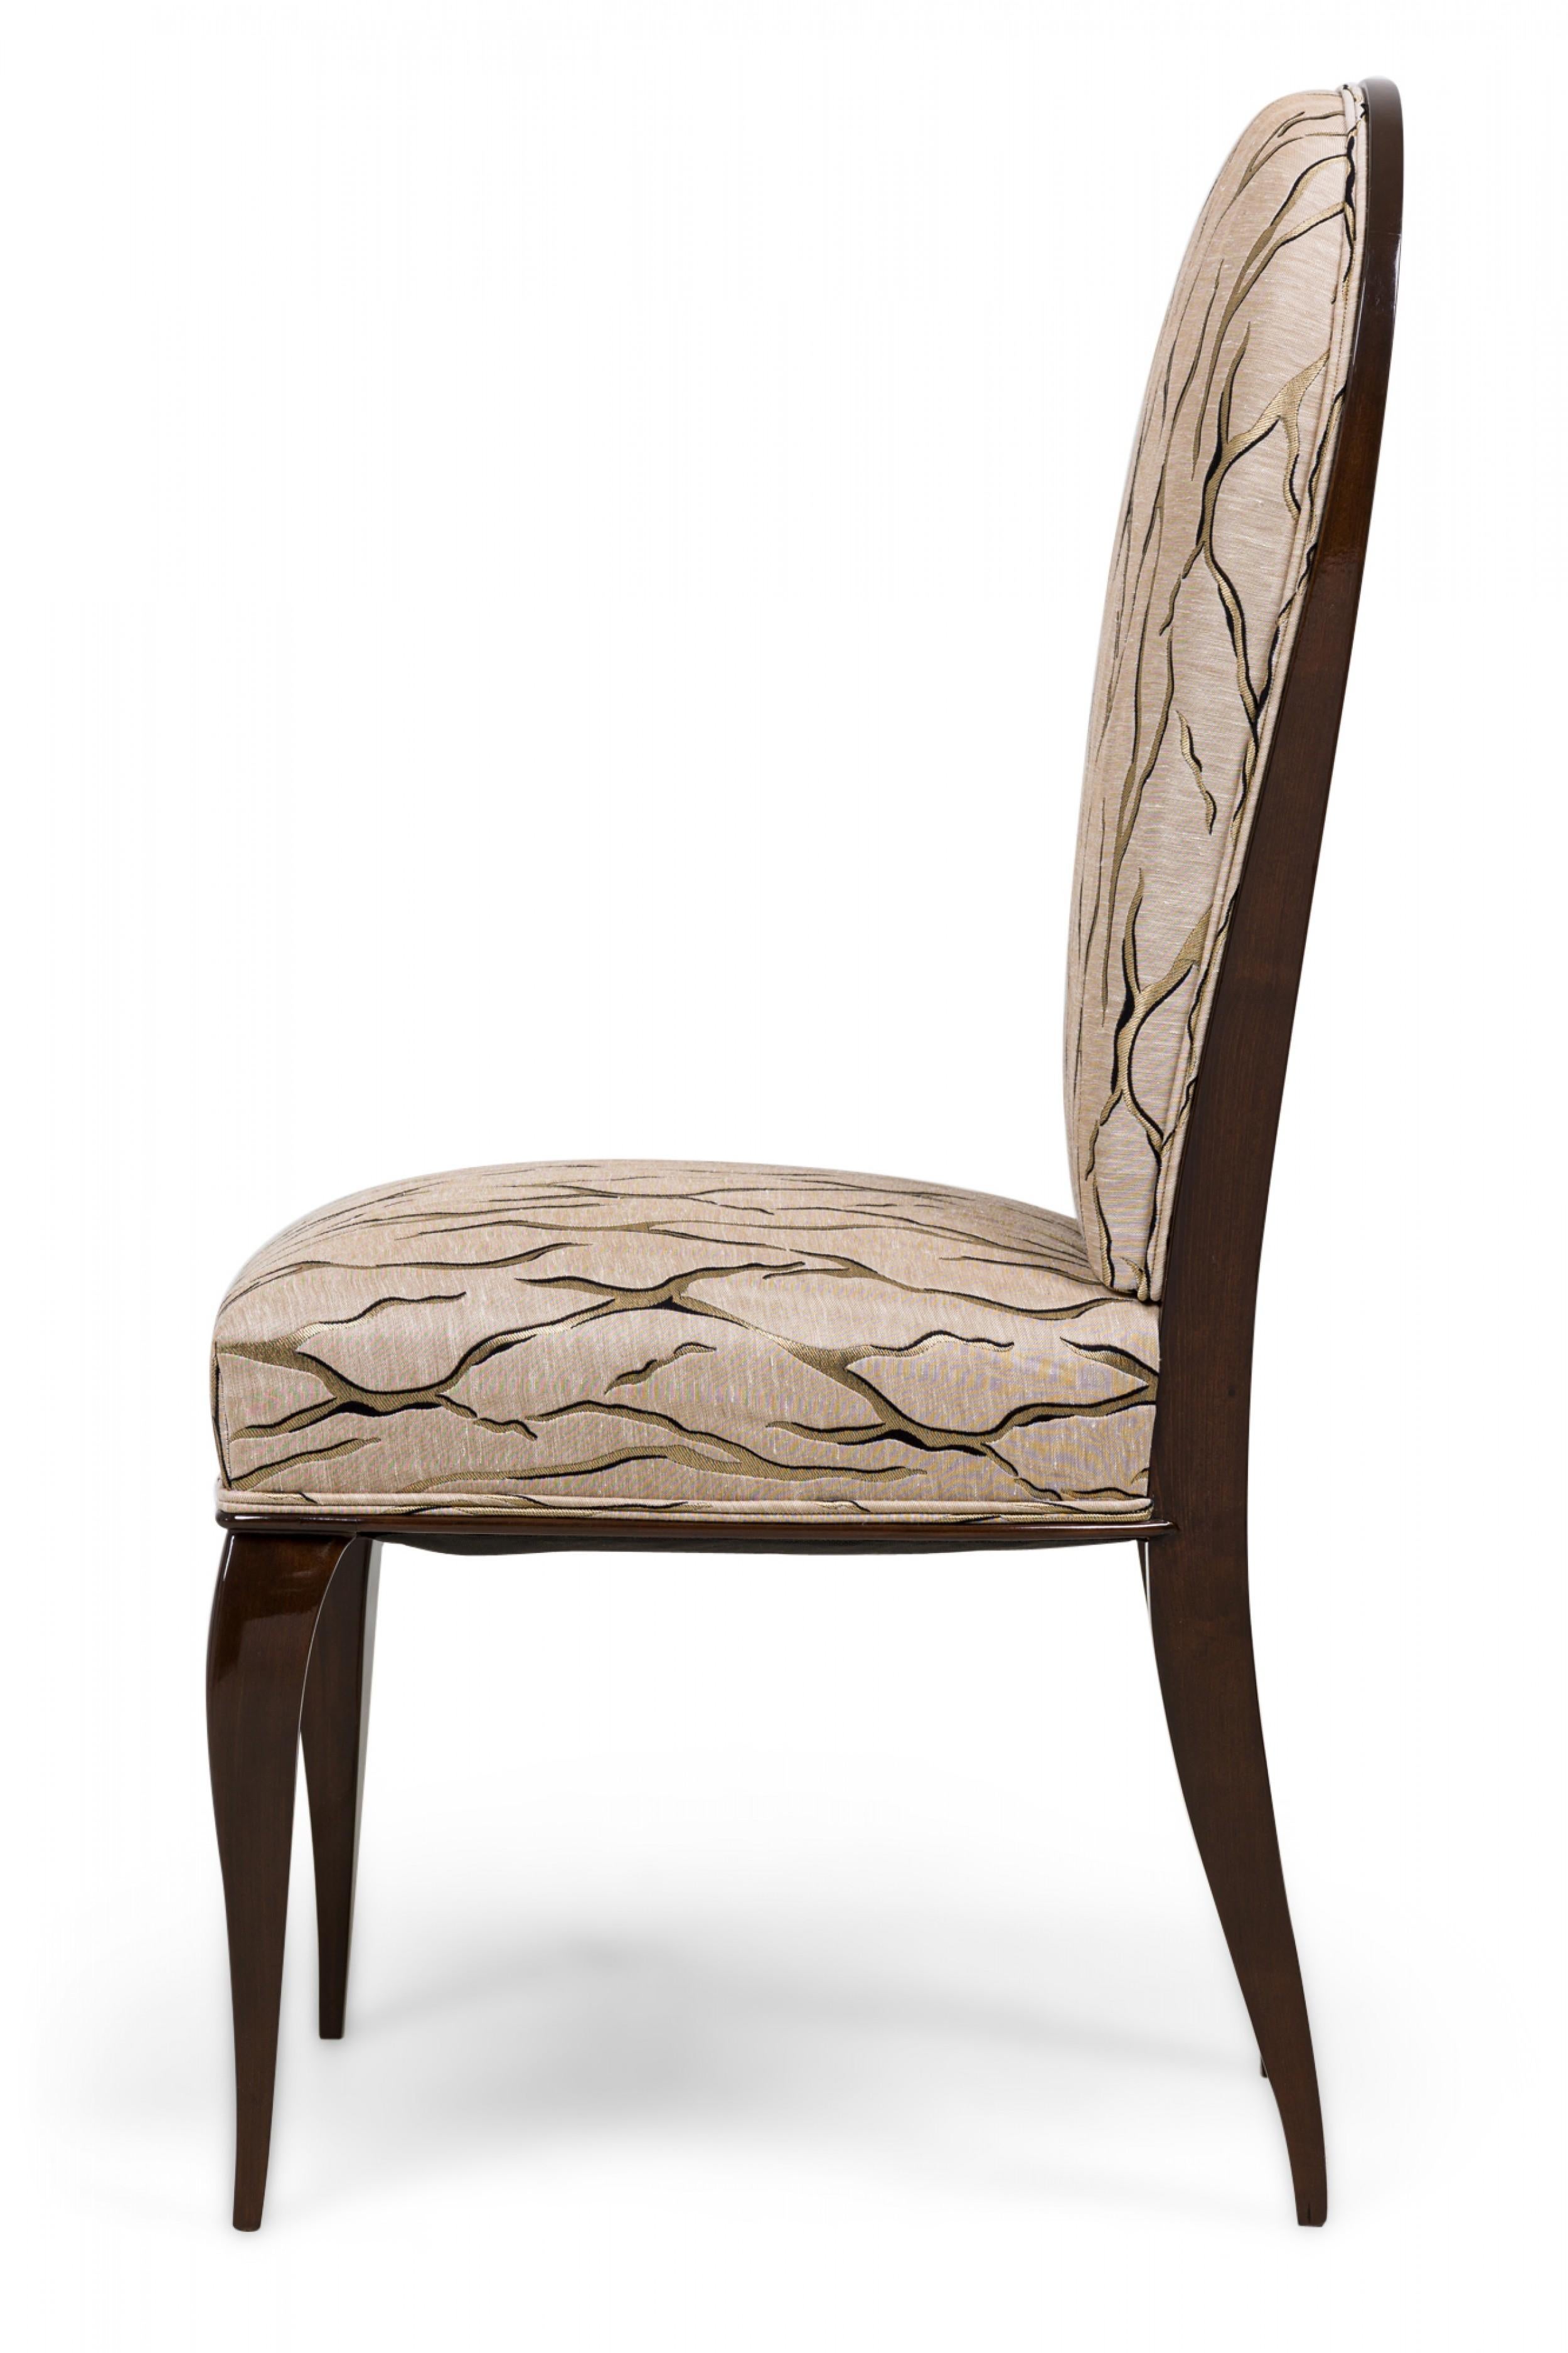 20th Century Dominique et Cie French Art Deco Mahogany Beige & Gold Upholstered Dining Chairs For Sale